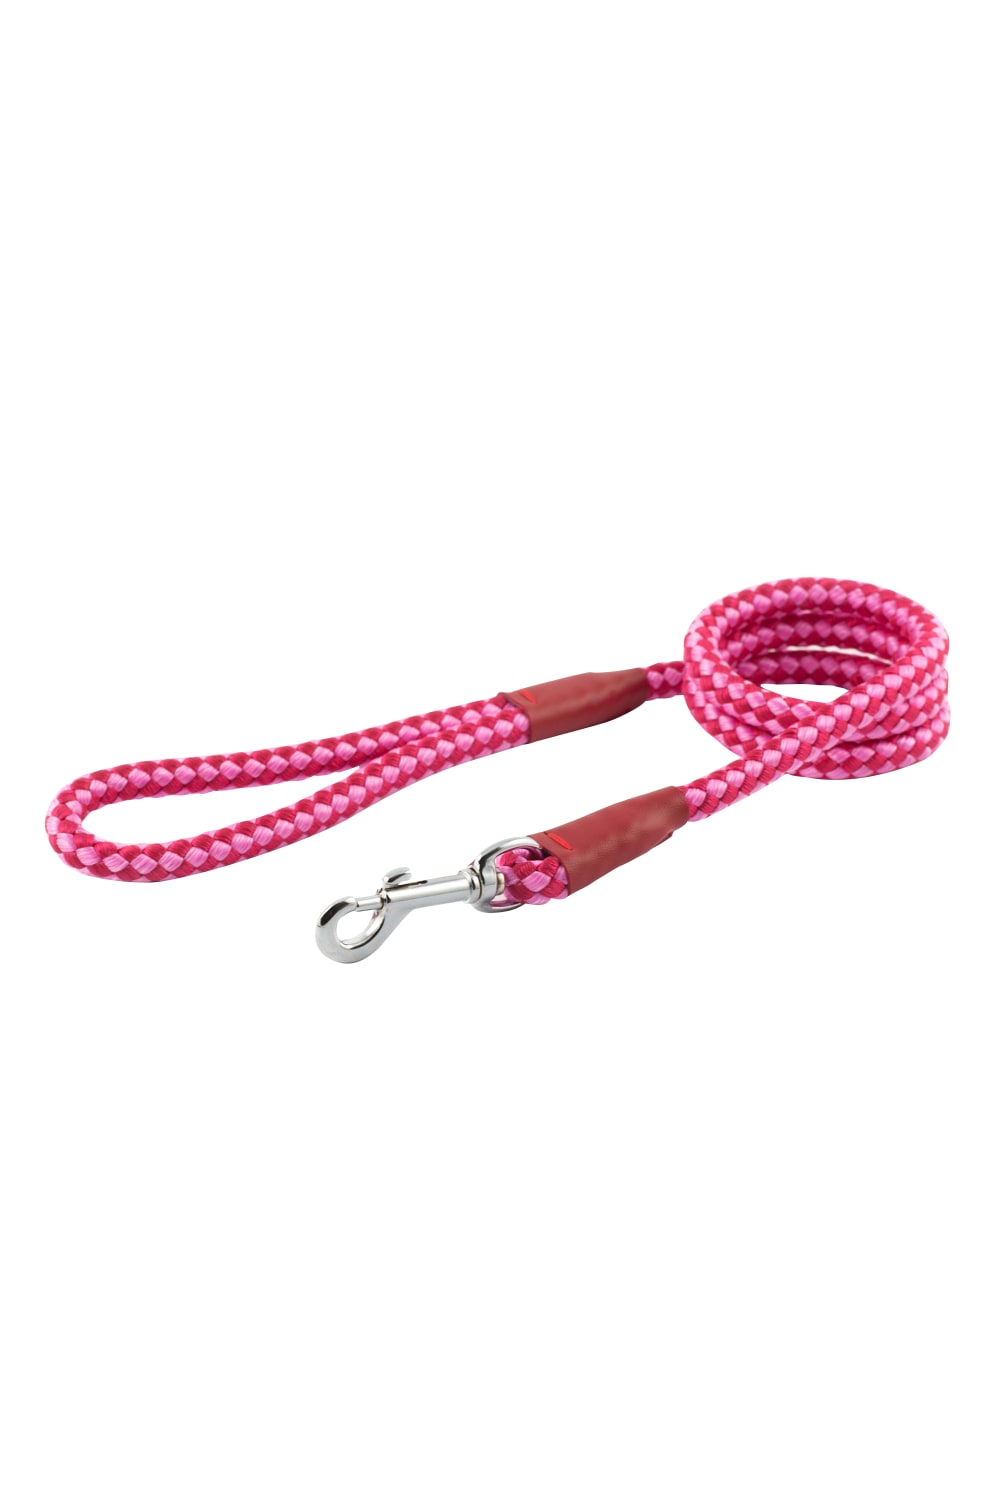 Ancol Pet Products Heritage Rope Dog Lead (Raspberry) (0.3in x 1.07m)